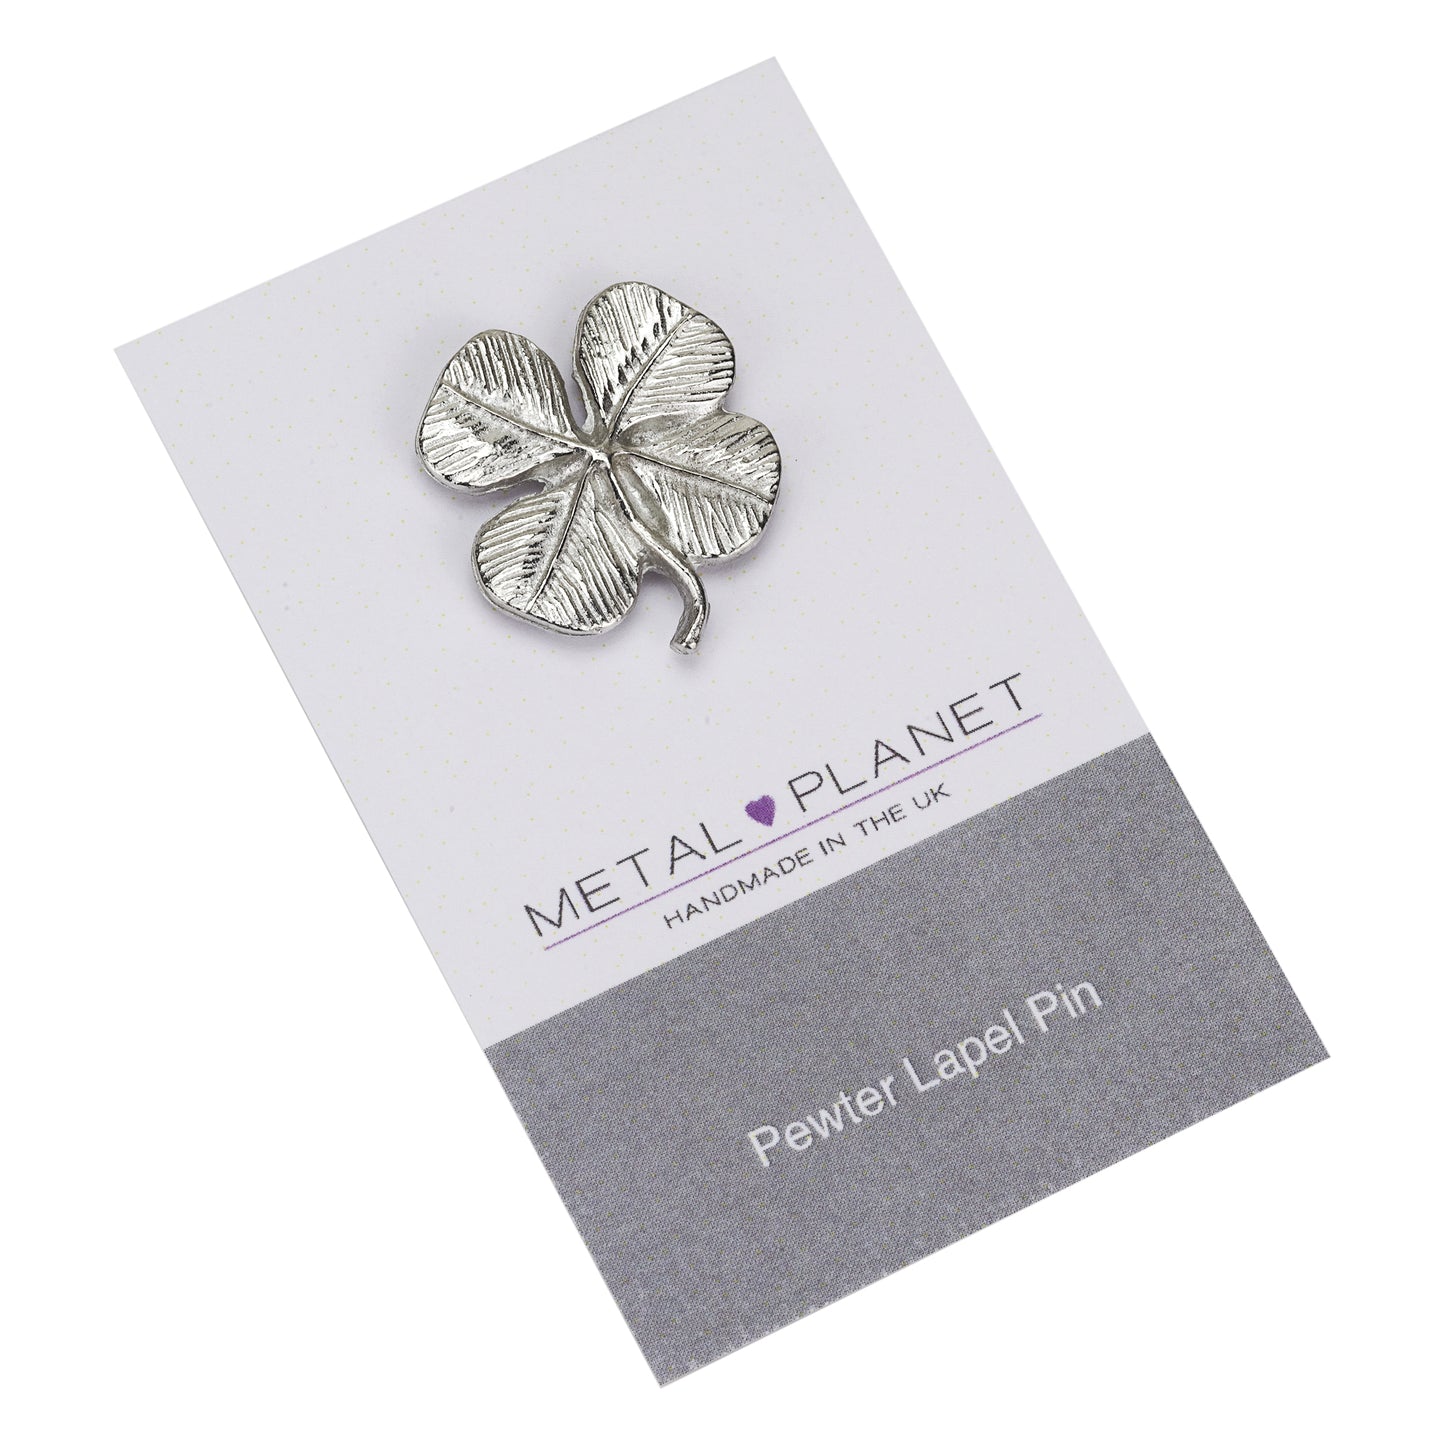 For Luck - A gorgeous 4 Leaf Clover pewter jacket pin